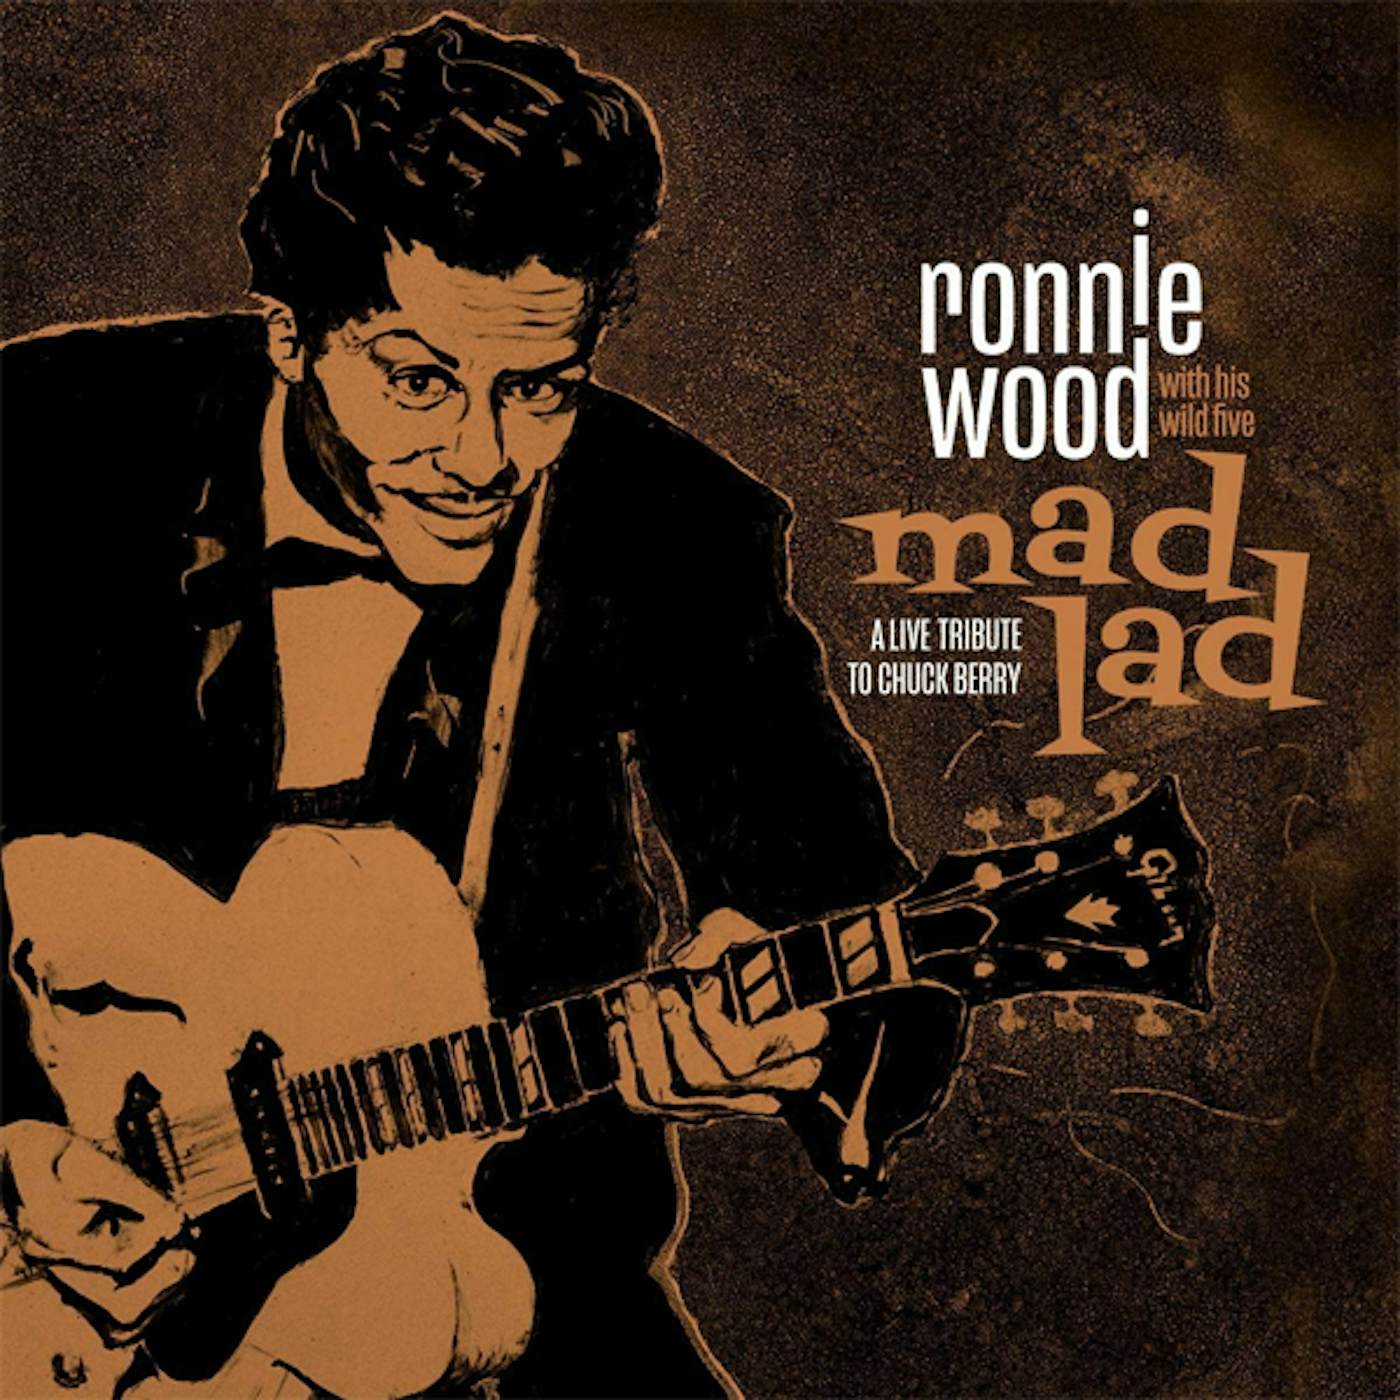 Ronnie Wood & His Wild Five MAD LAD: A LIVE TRIBUTE TO CHUCK BERRY Vinyl Record